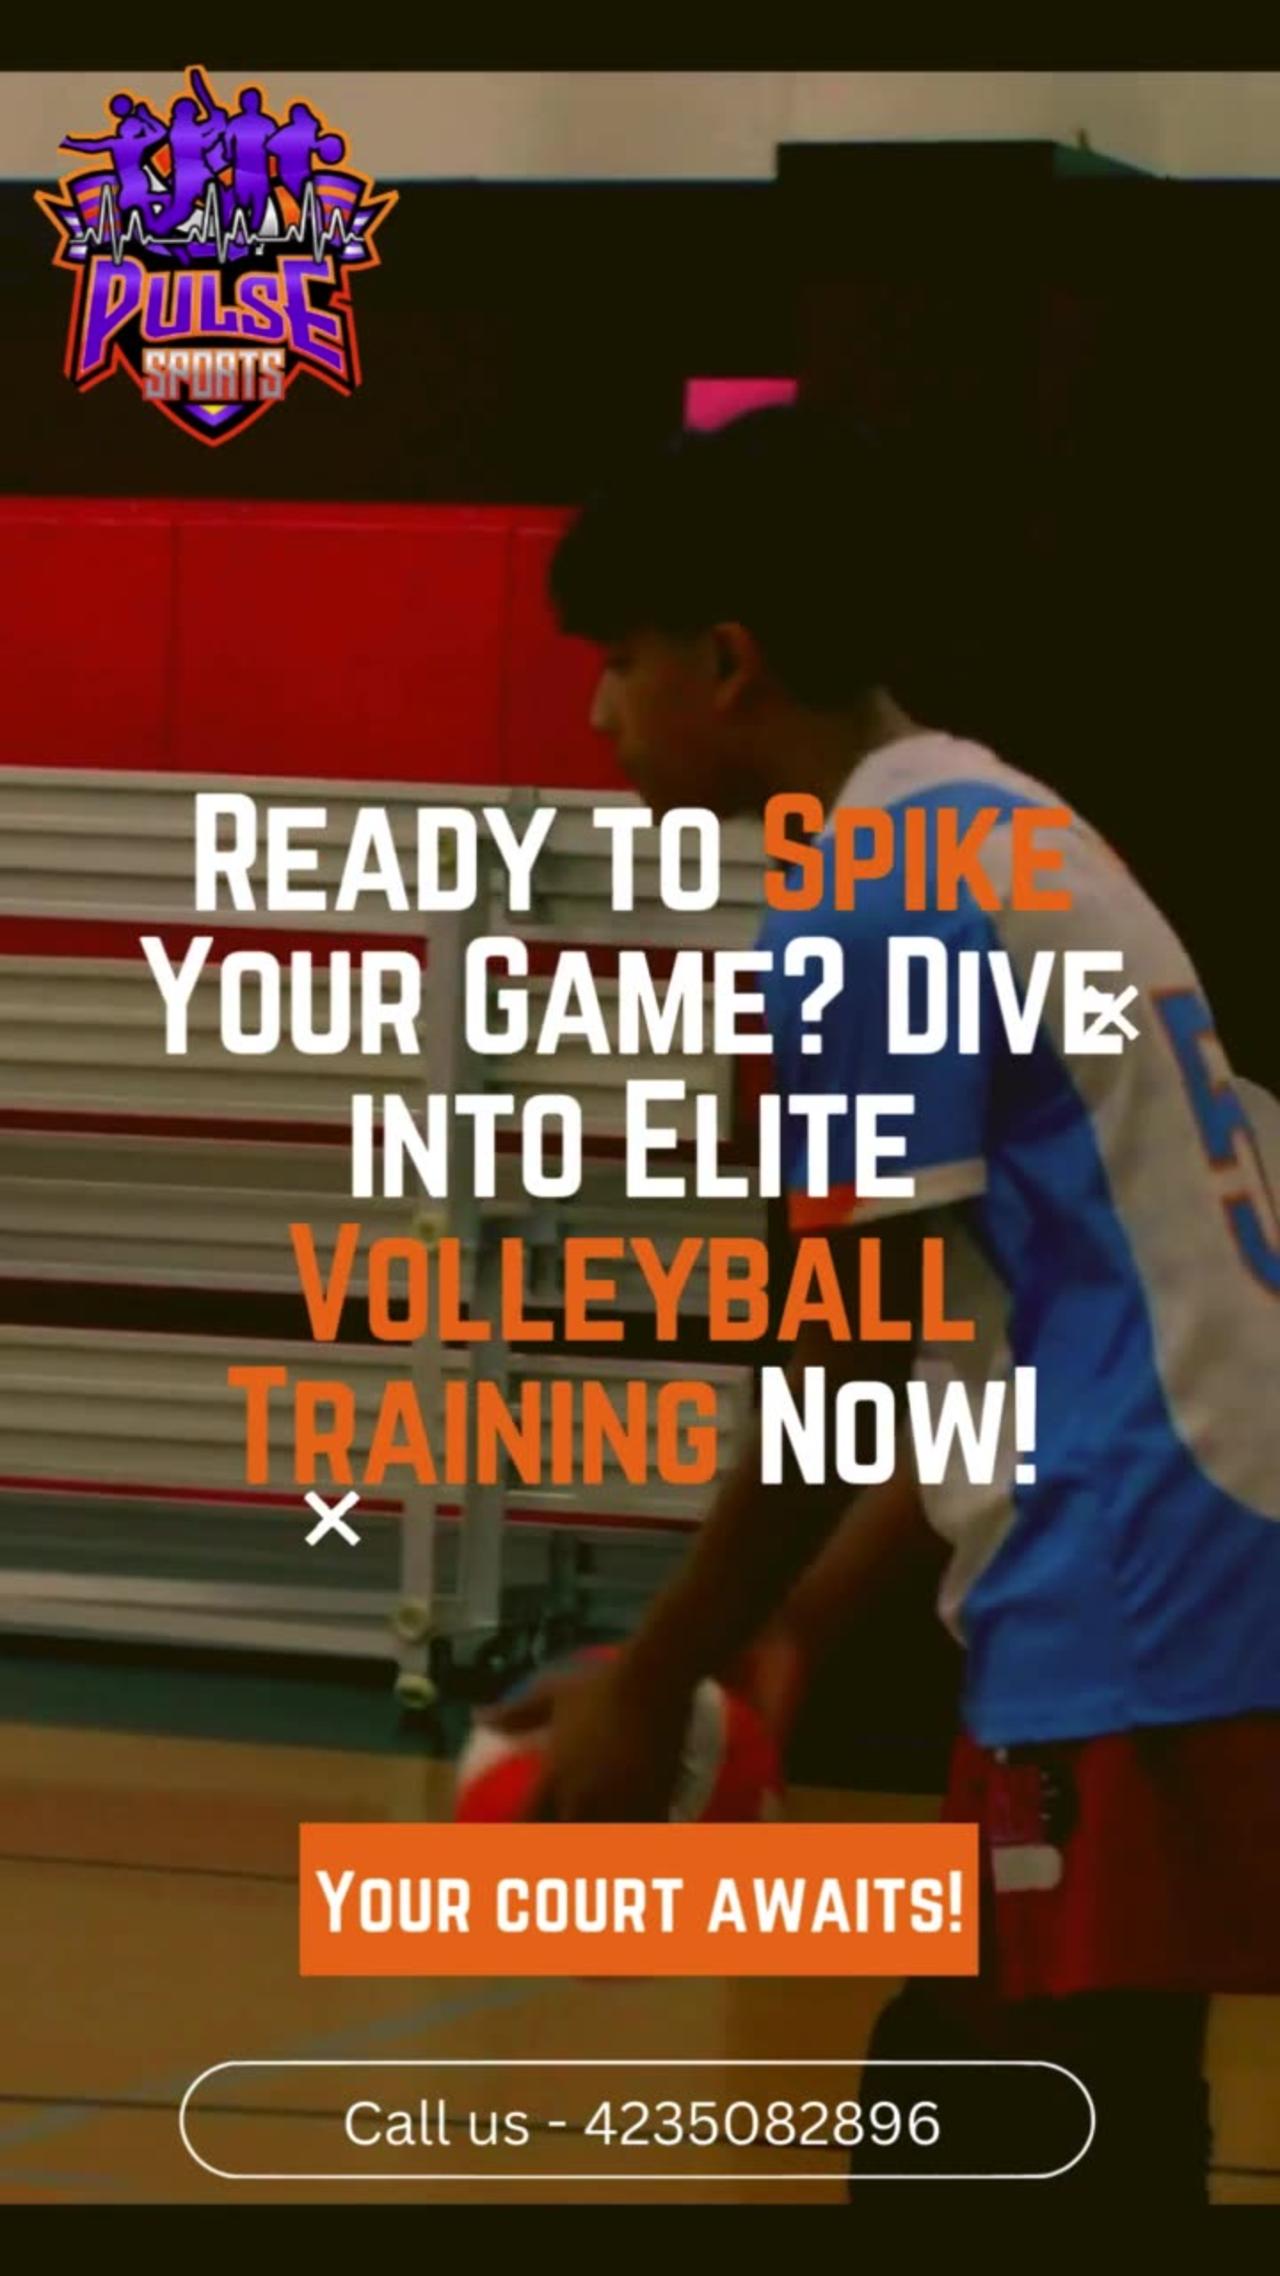 Pulse Sports Volleyball Club in Texas